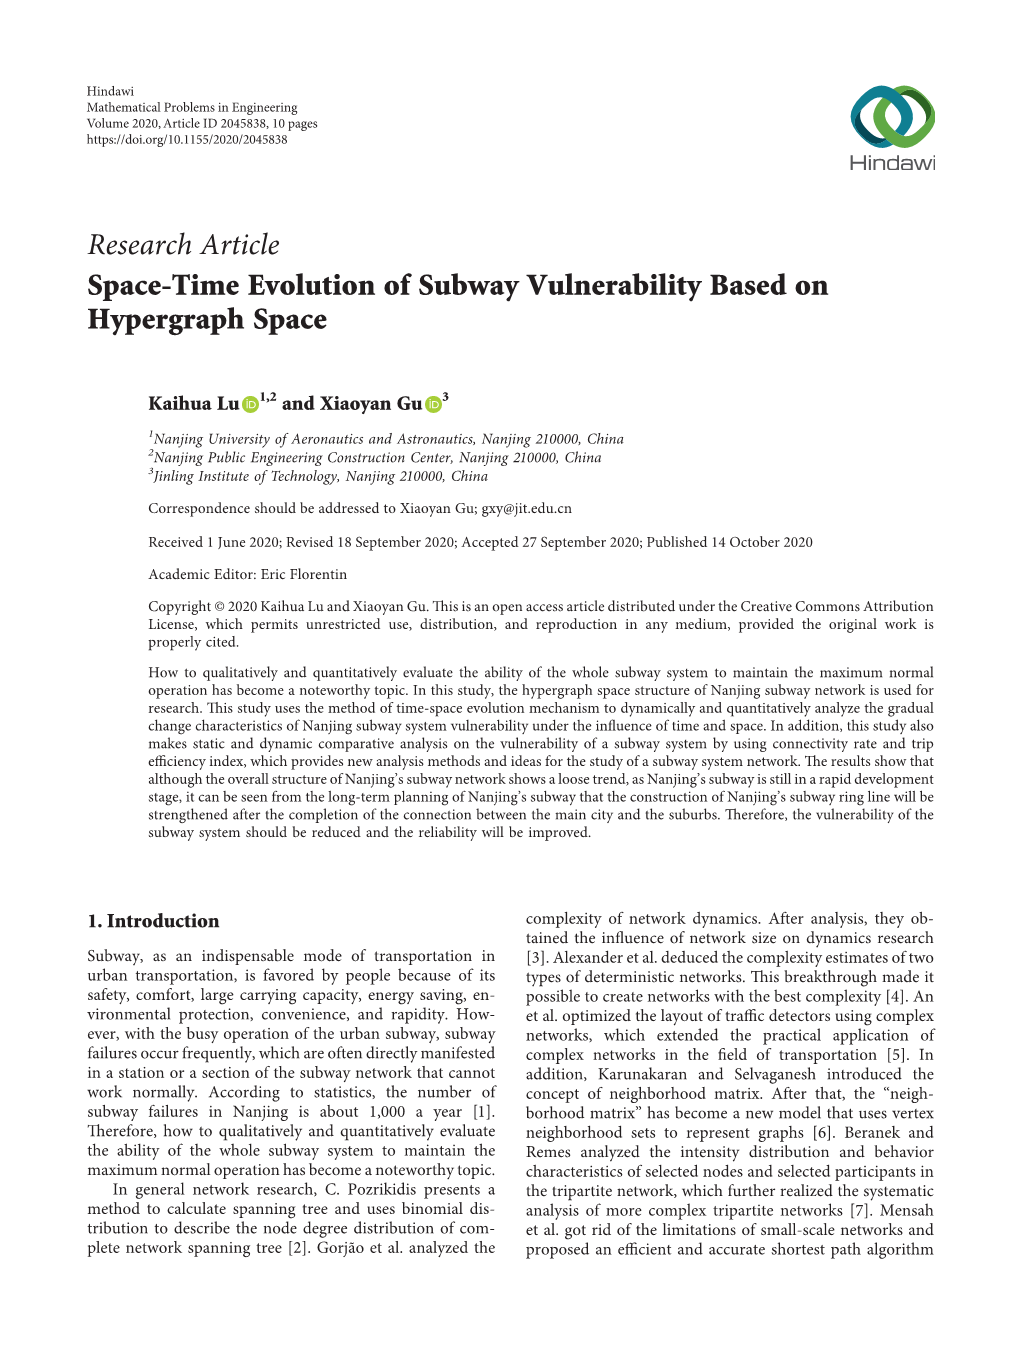 Space-Time Evolution of Subway Vulnerability Based on Hypergraph Space